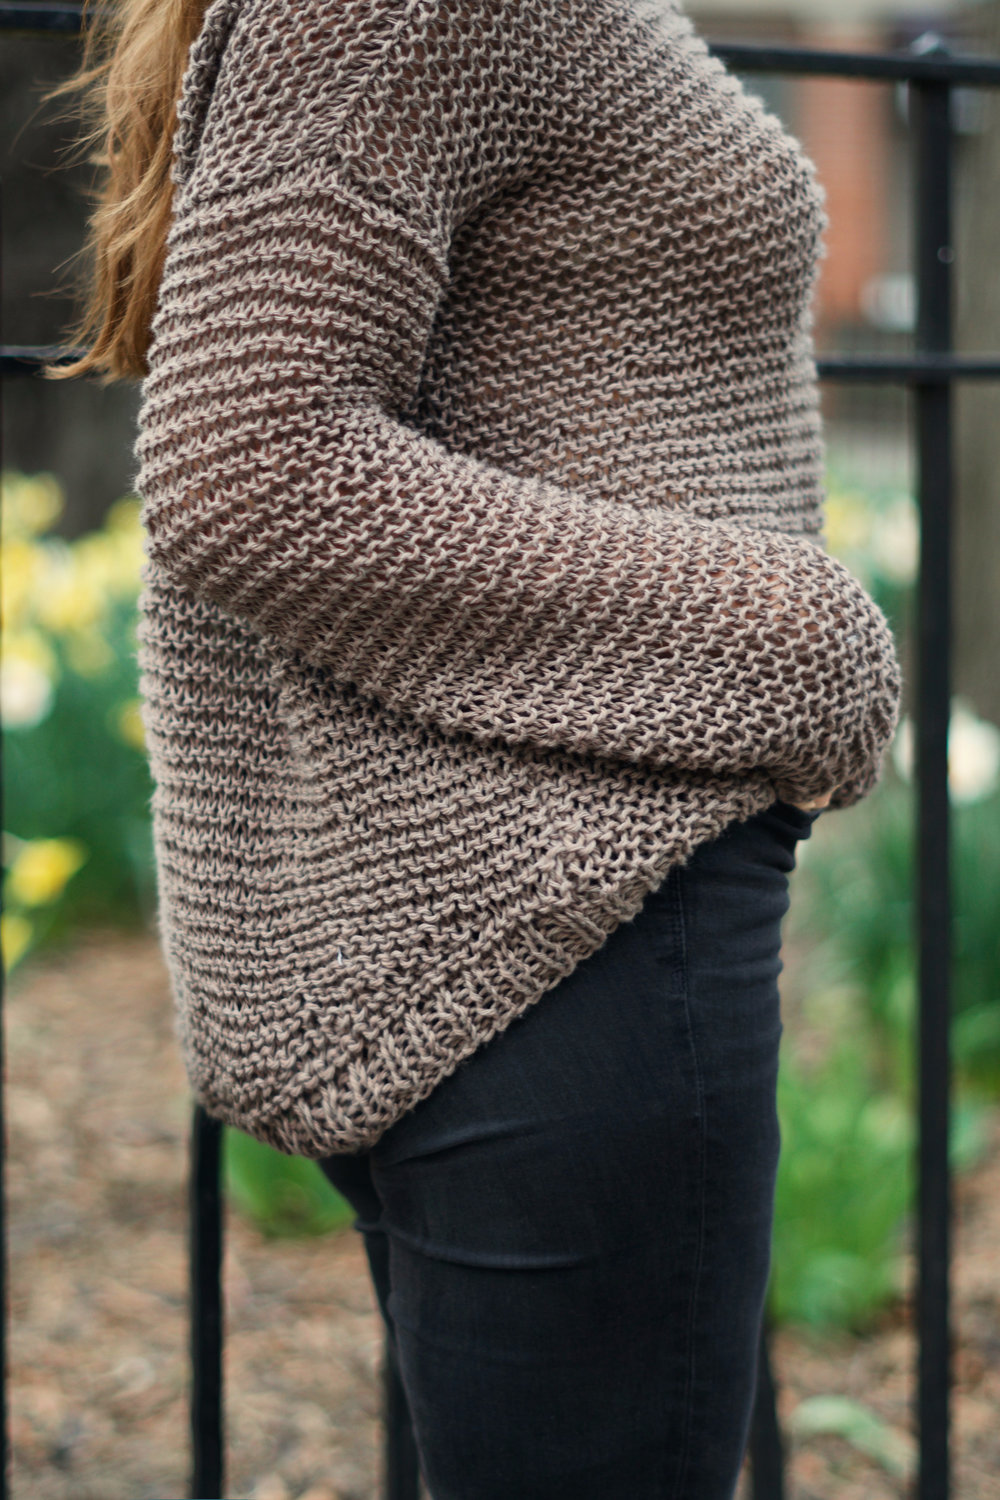 Spring Breeze Sweater pattern by Two of Wands